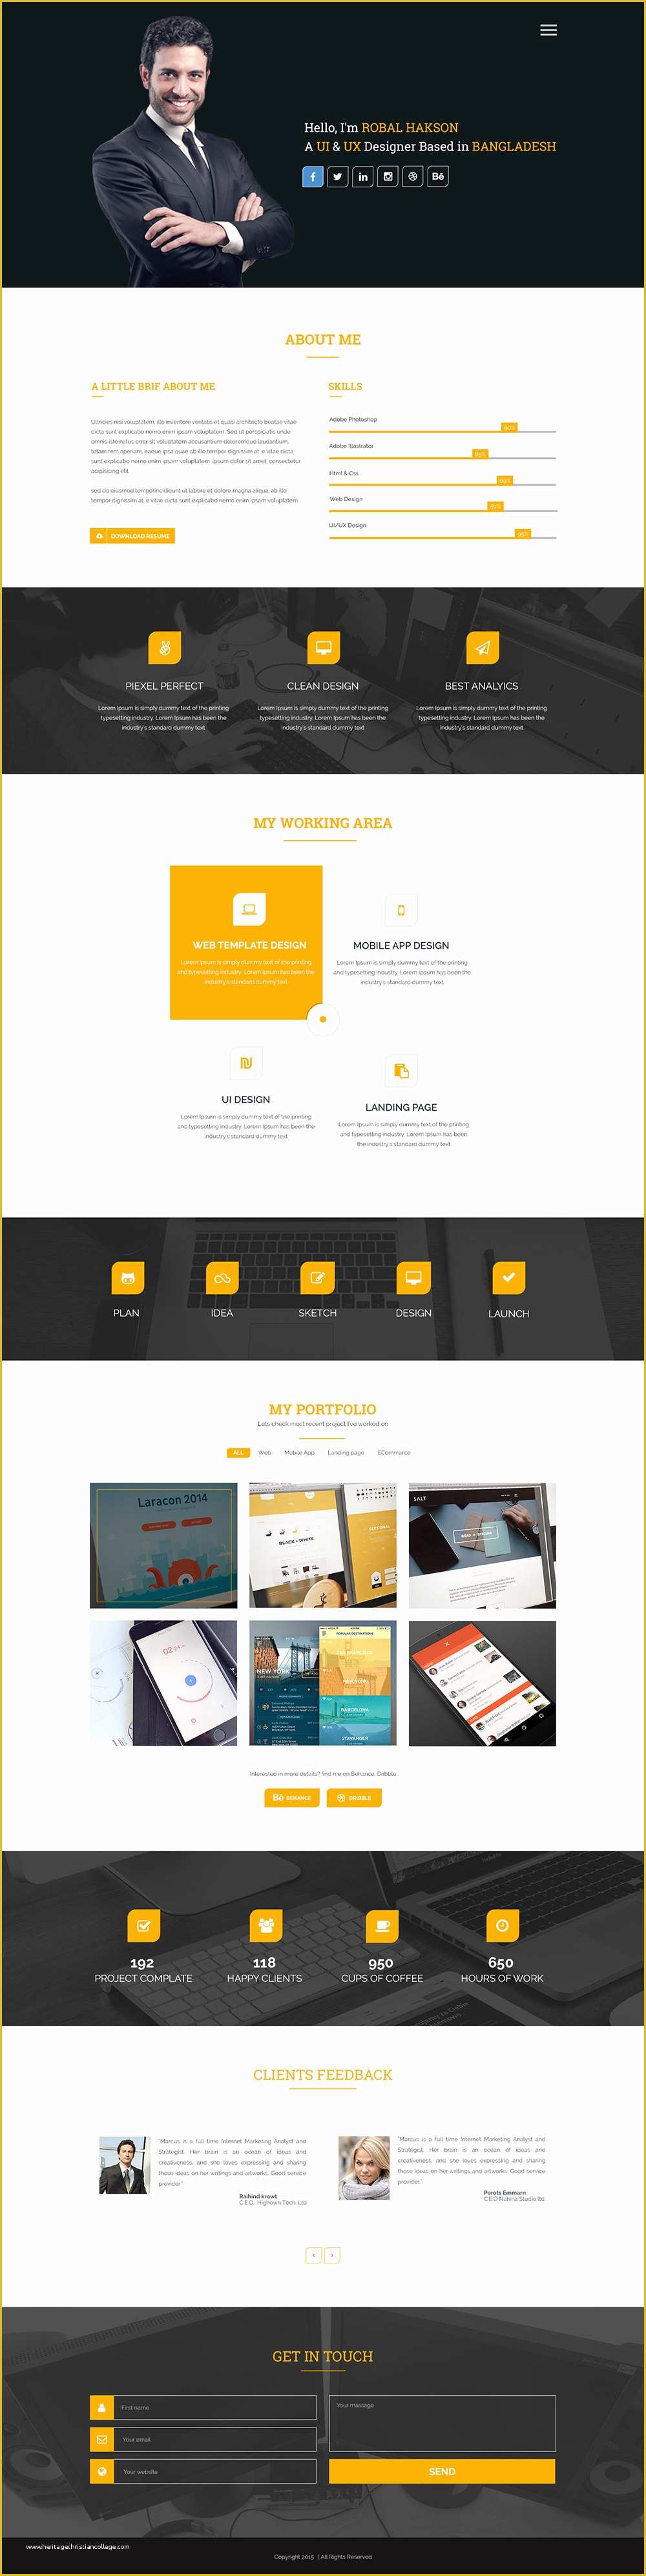 One Page Portfolio Template Free Download Of Clean E Page Corporate Portfolio Website Template Free